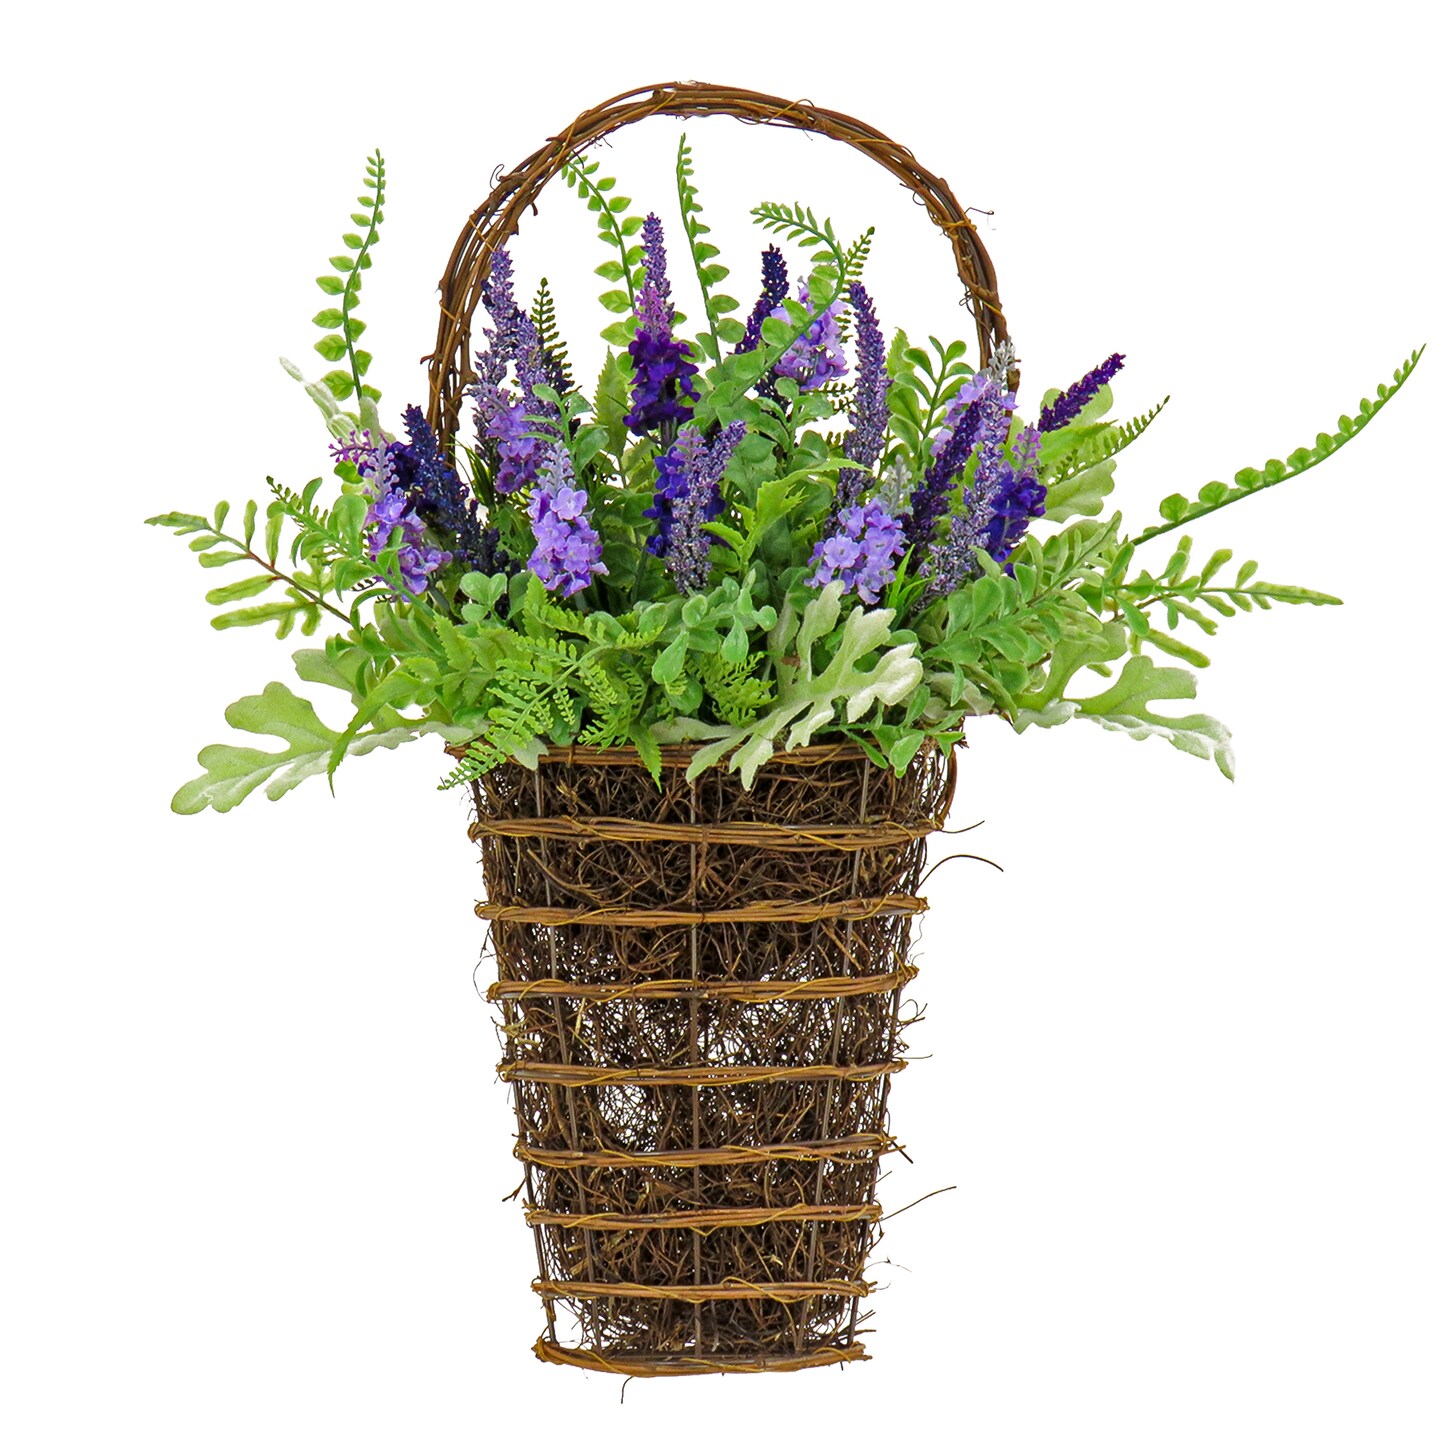 National Tree Company Artificial Hanging Wall Basket, Wicker Base, Decorated with Astilbe Flowers, Ferns, Leafy Greens, Spring Collection, 20 Inches